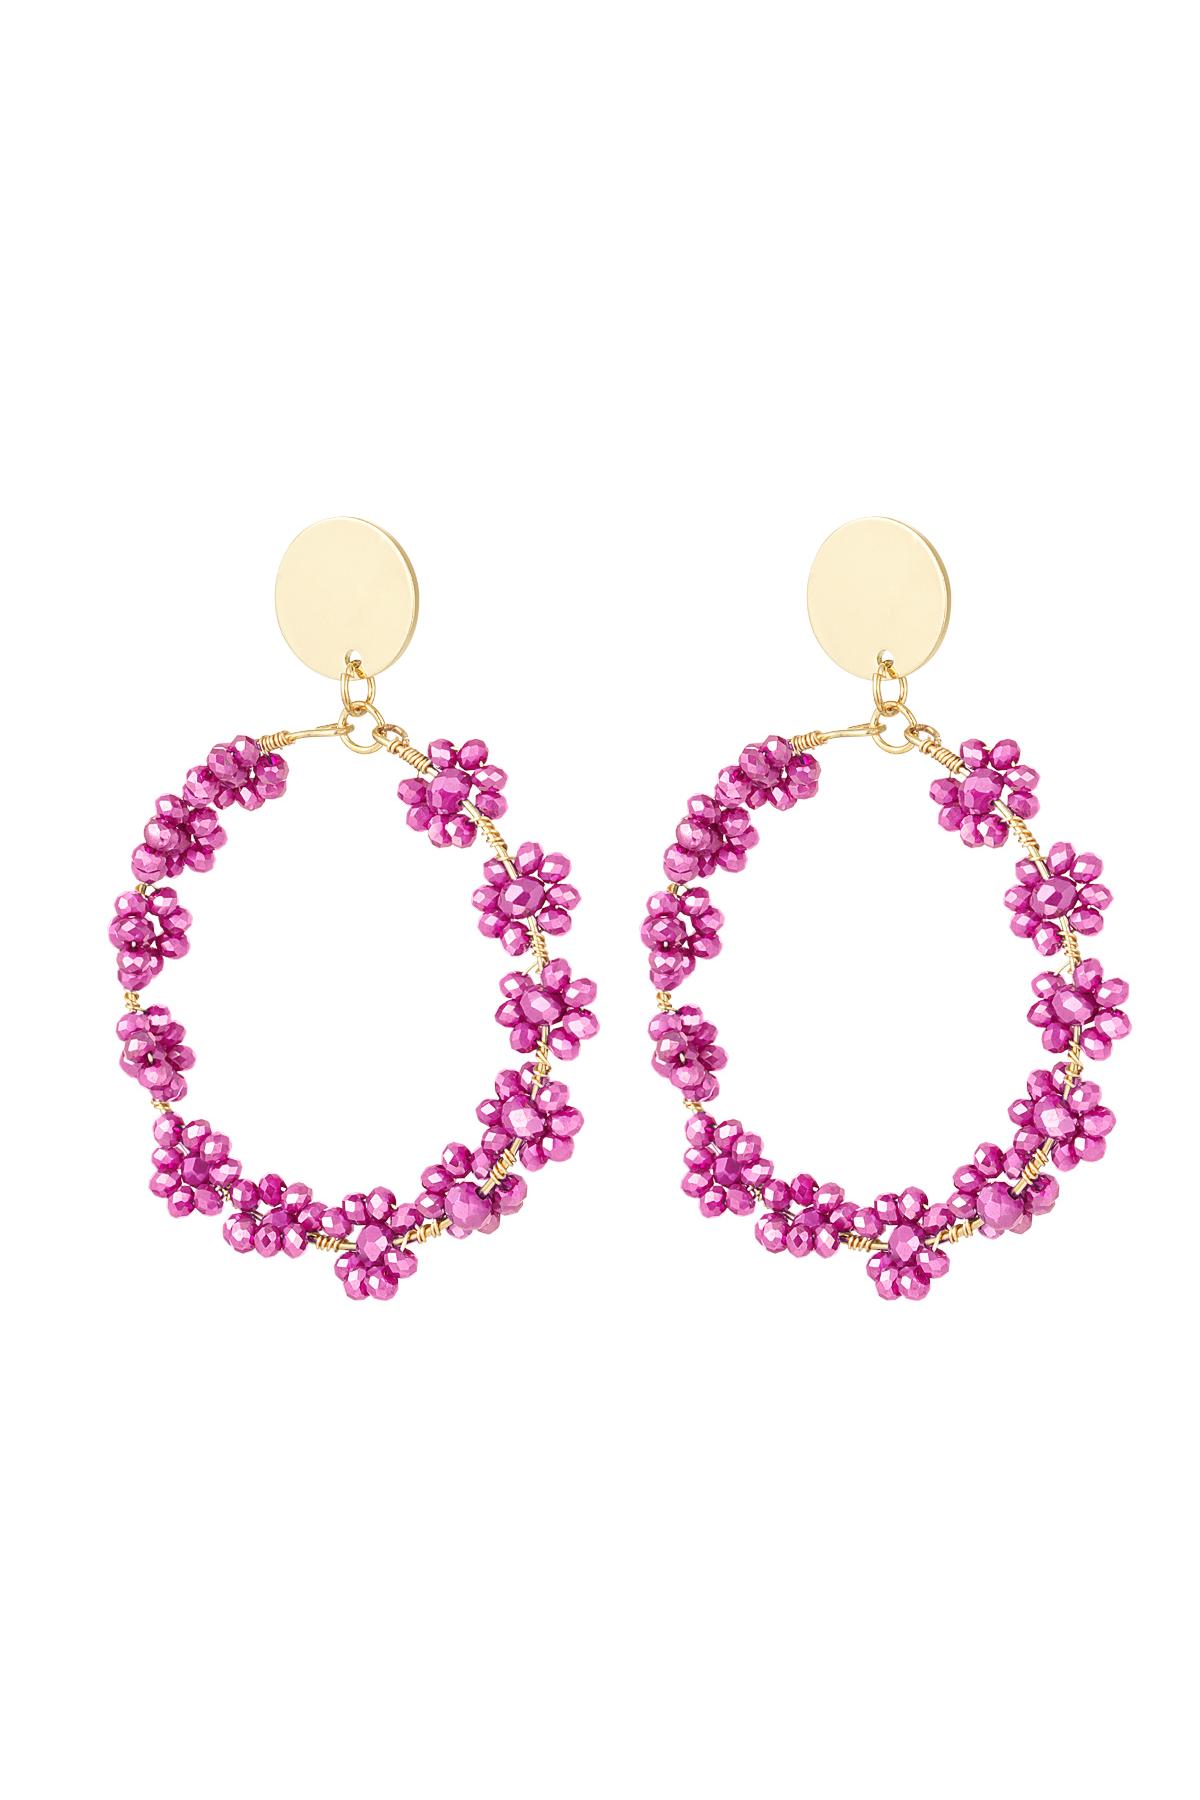 Earrings with bunches of flowers Fuchsia Copper